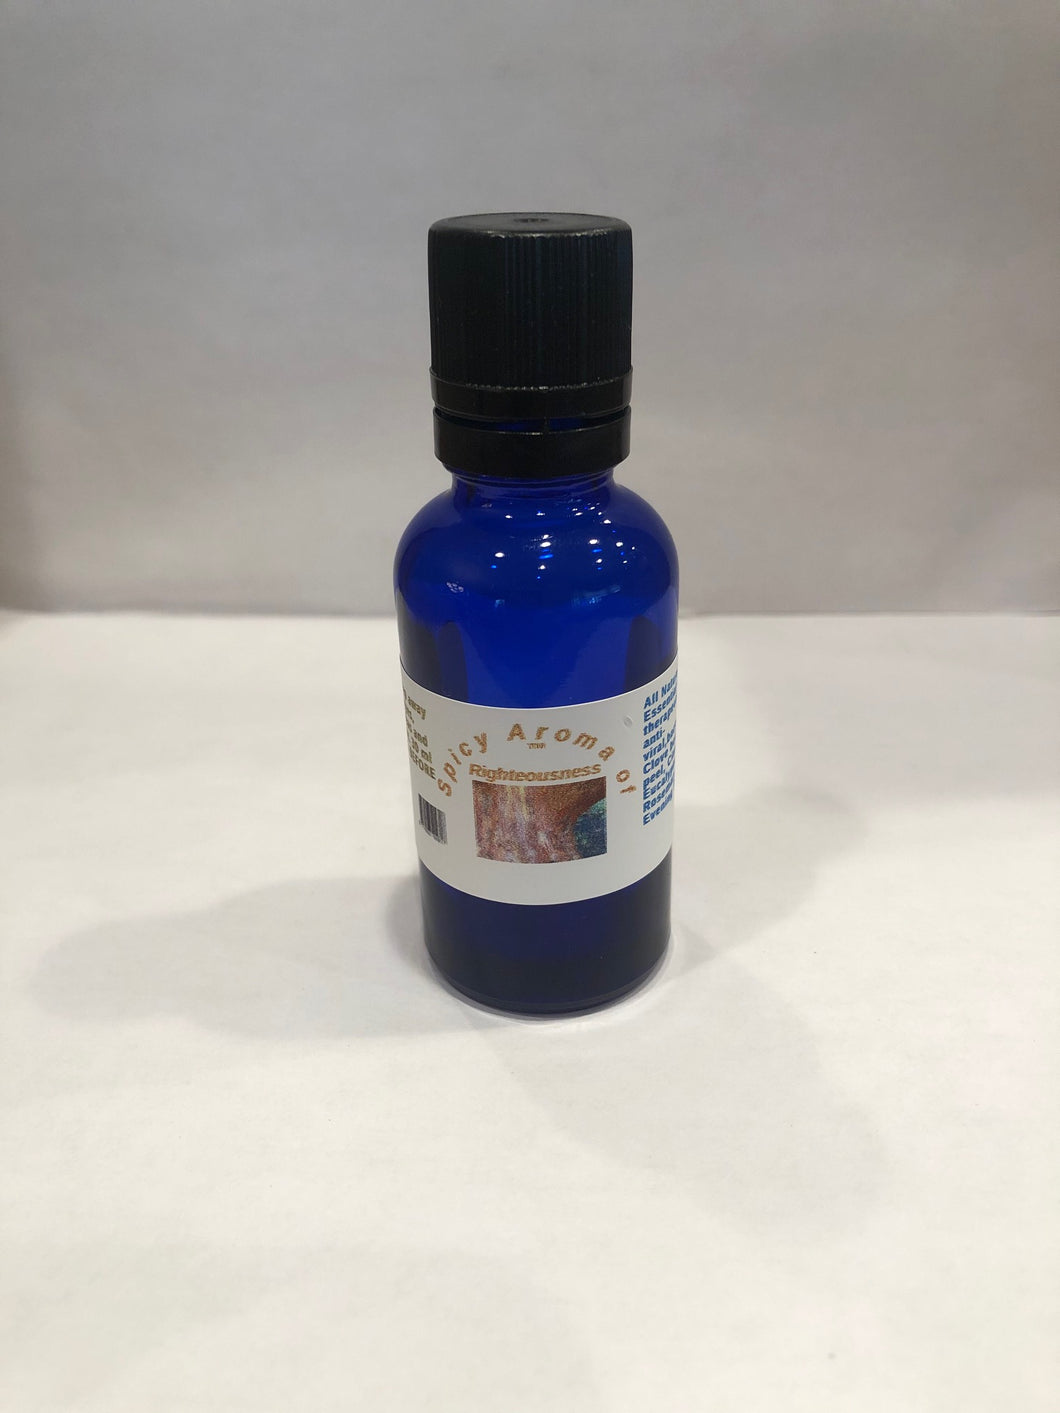 Spicy Aroma Righteousness ™ 30 ml  1 oz. Essential Oil Compound